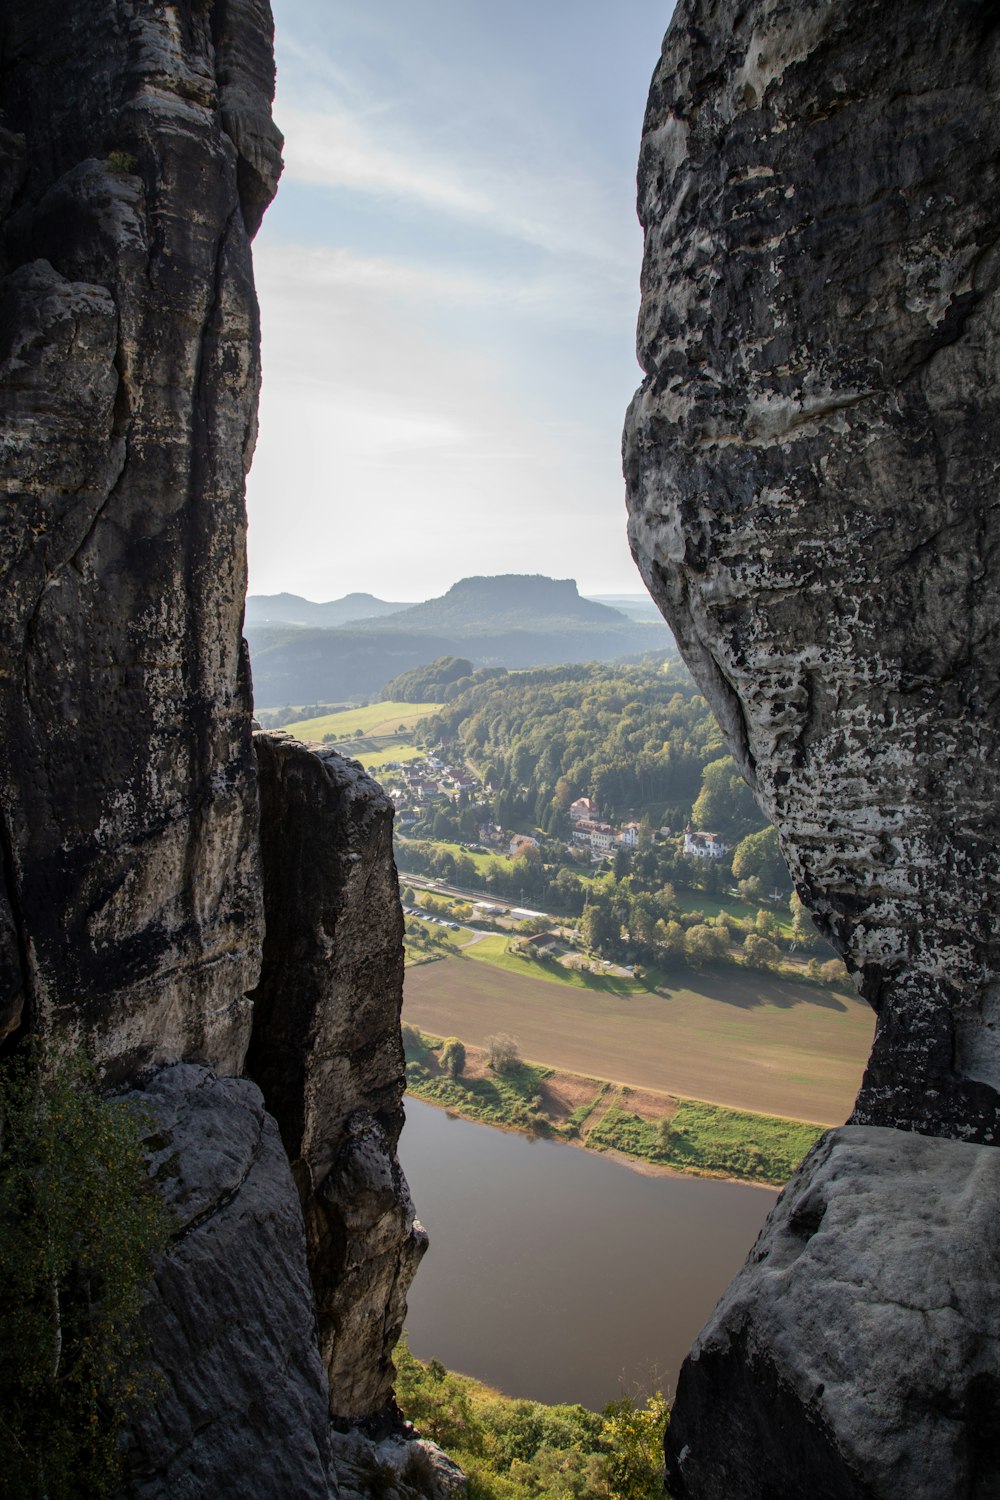 a view of a valley through a gap in a rock